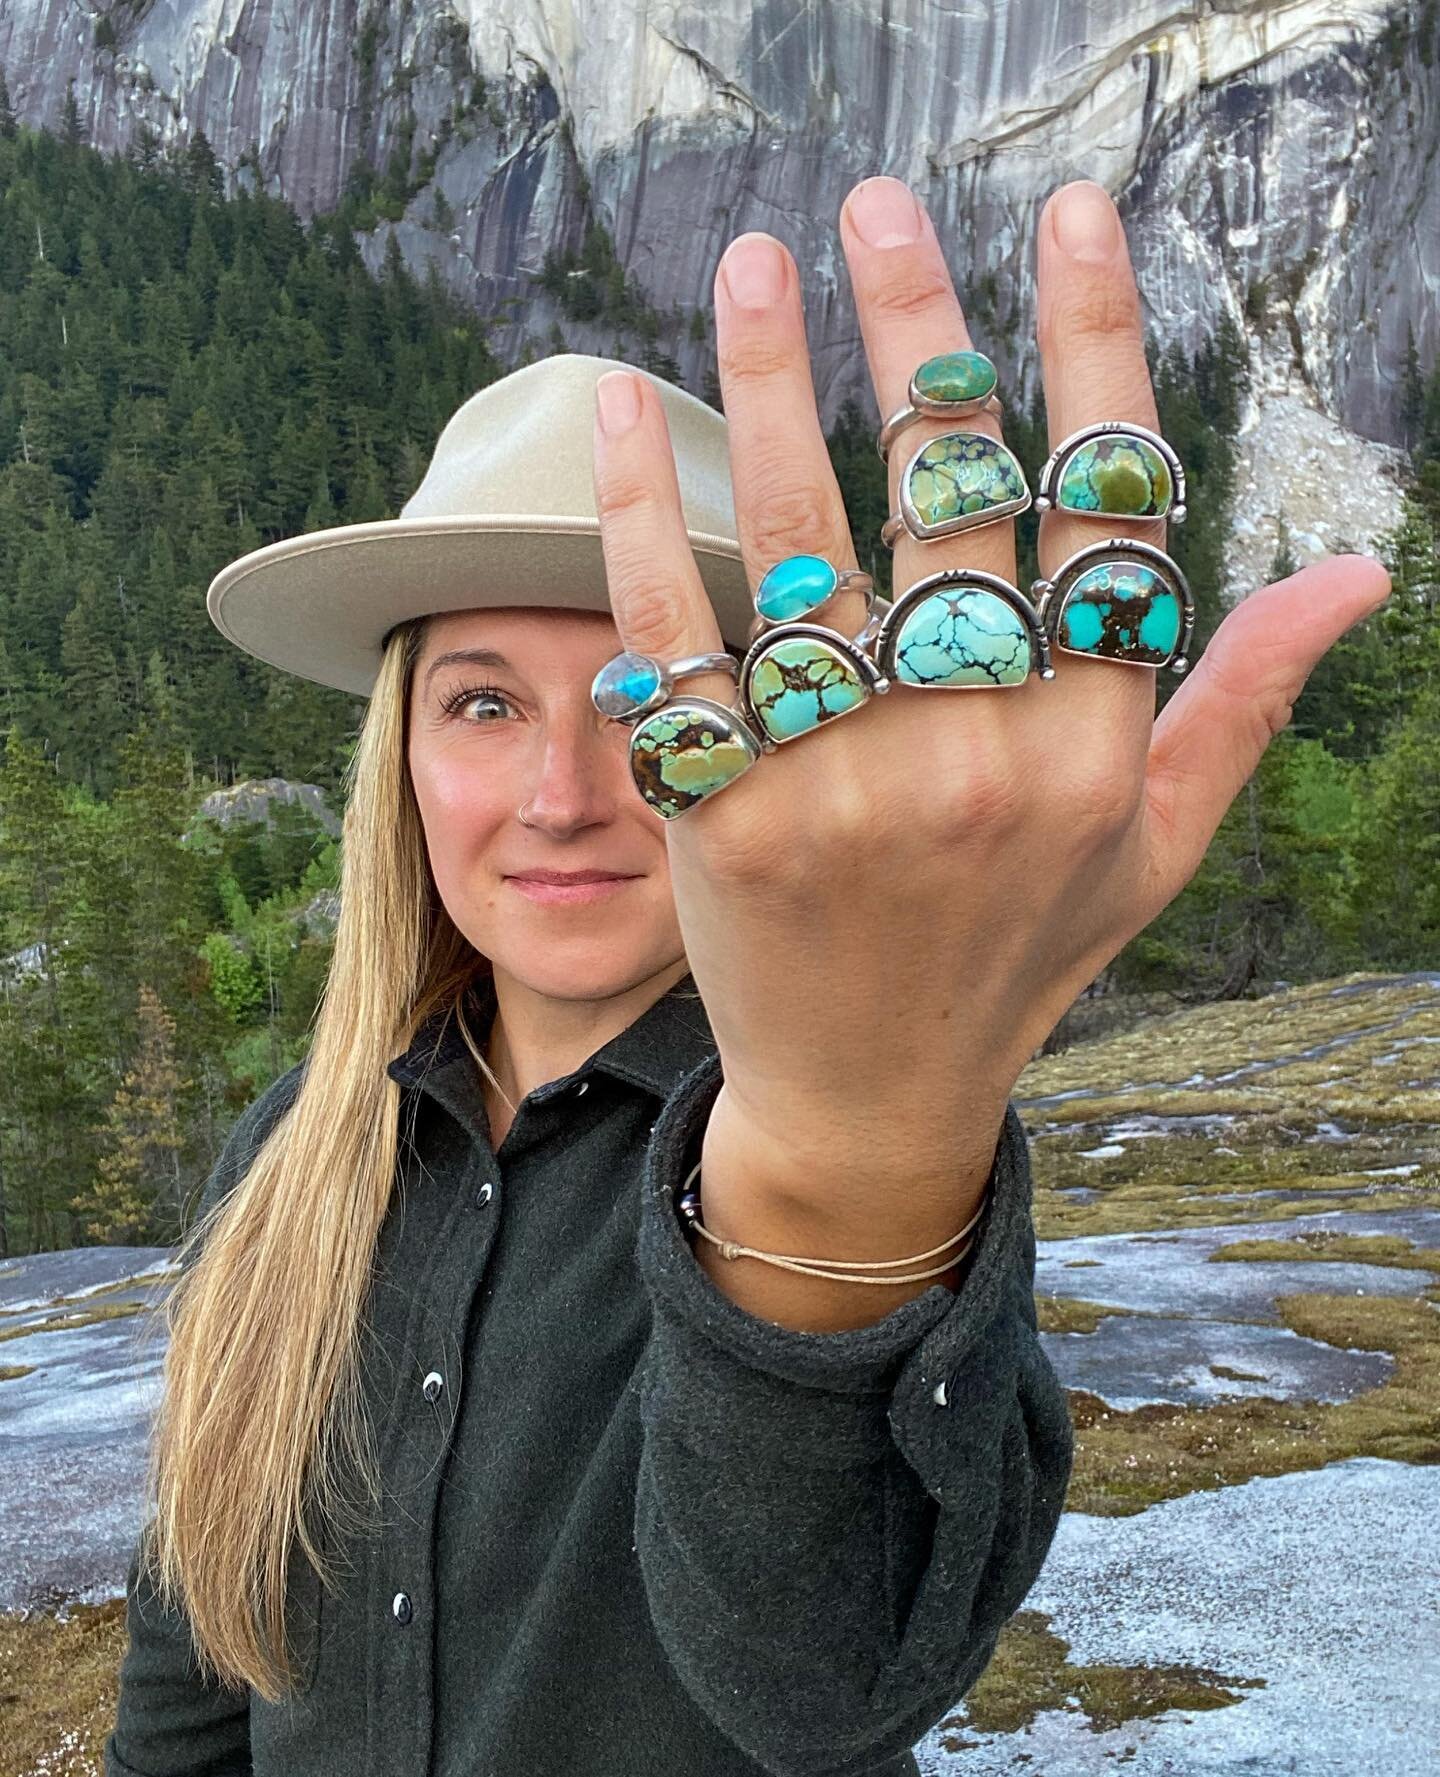 Excited to share something I&rsquo;ve been working on for some time: a brand new website designed by the talented @mirandamdesign and a new collection handcrafted by me. 

The latest pieces in my shop are inspired by a recent trip to Montana and have